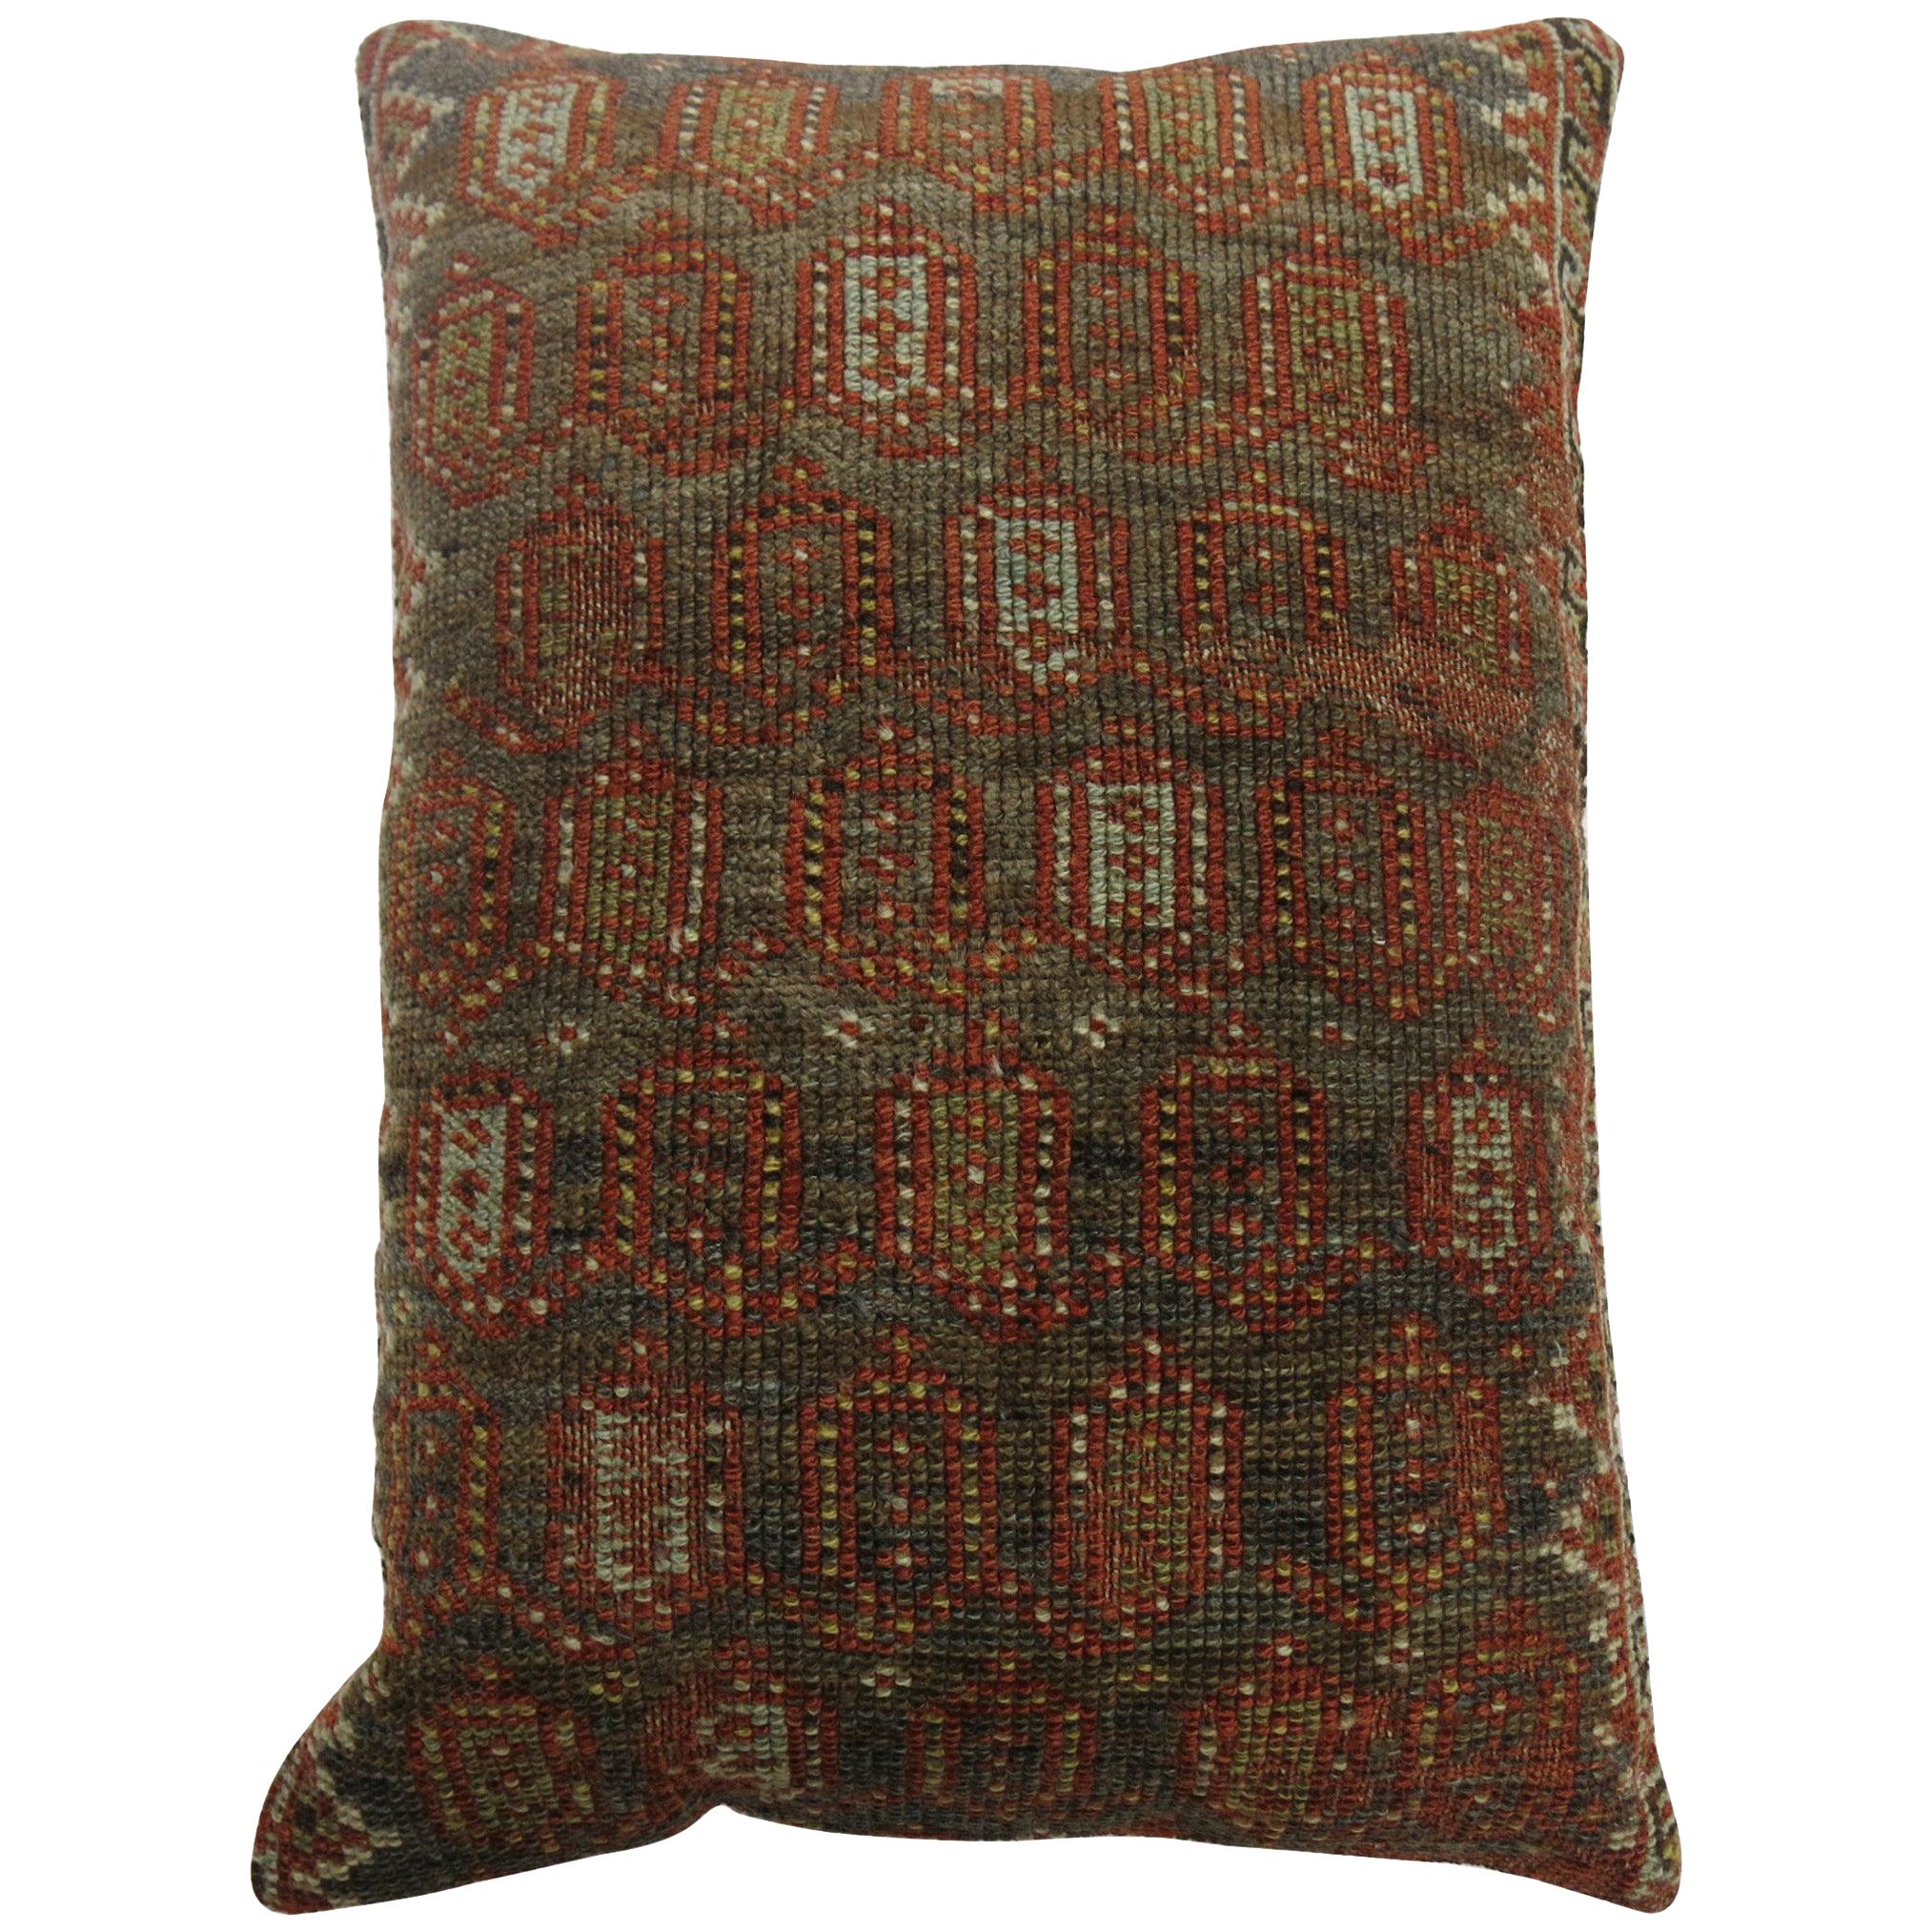 Large Antique 20th Century Brown Color Persian Malayer Paisley Rug Pillow For Sale